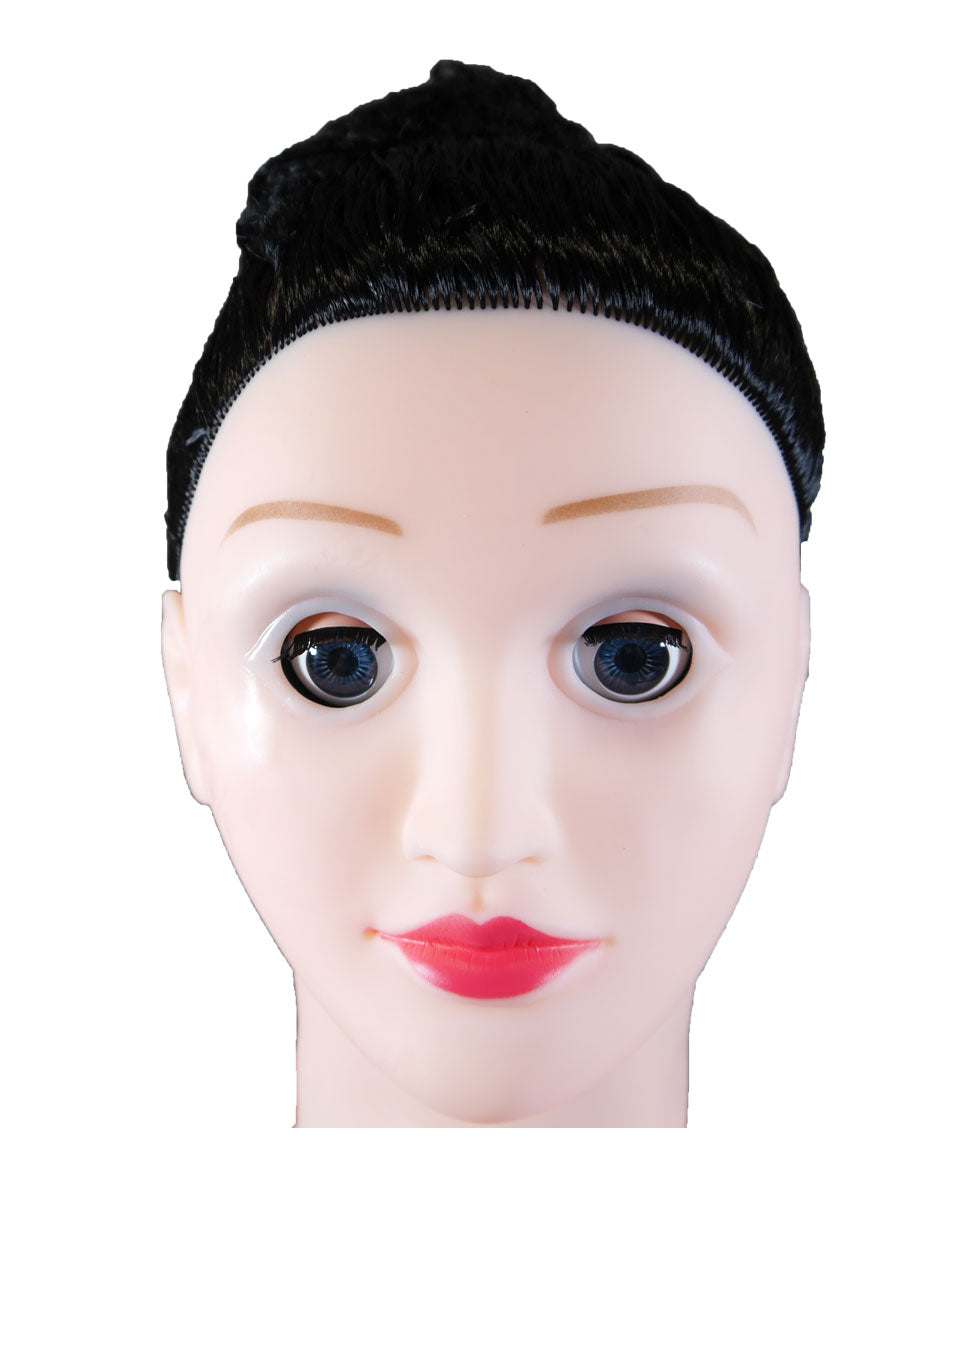 Bossoftoys Sindy Blowup doll with real face - 26-00020